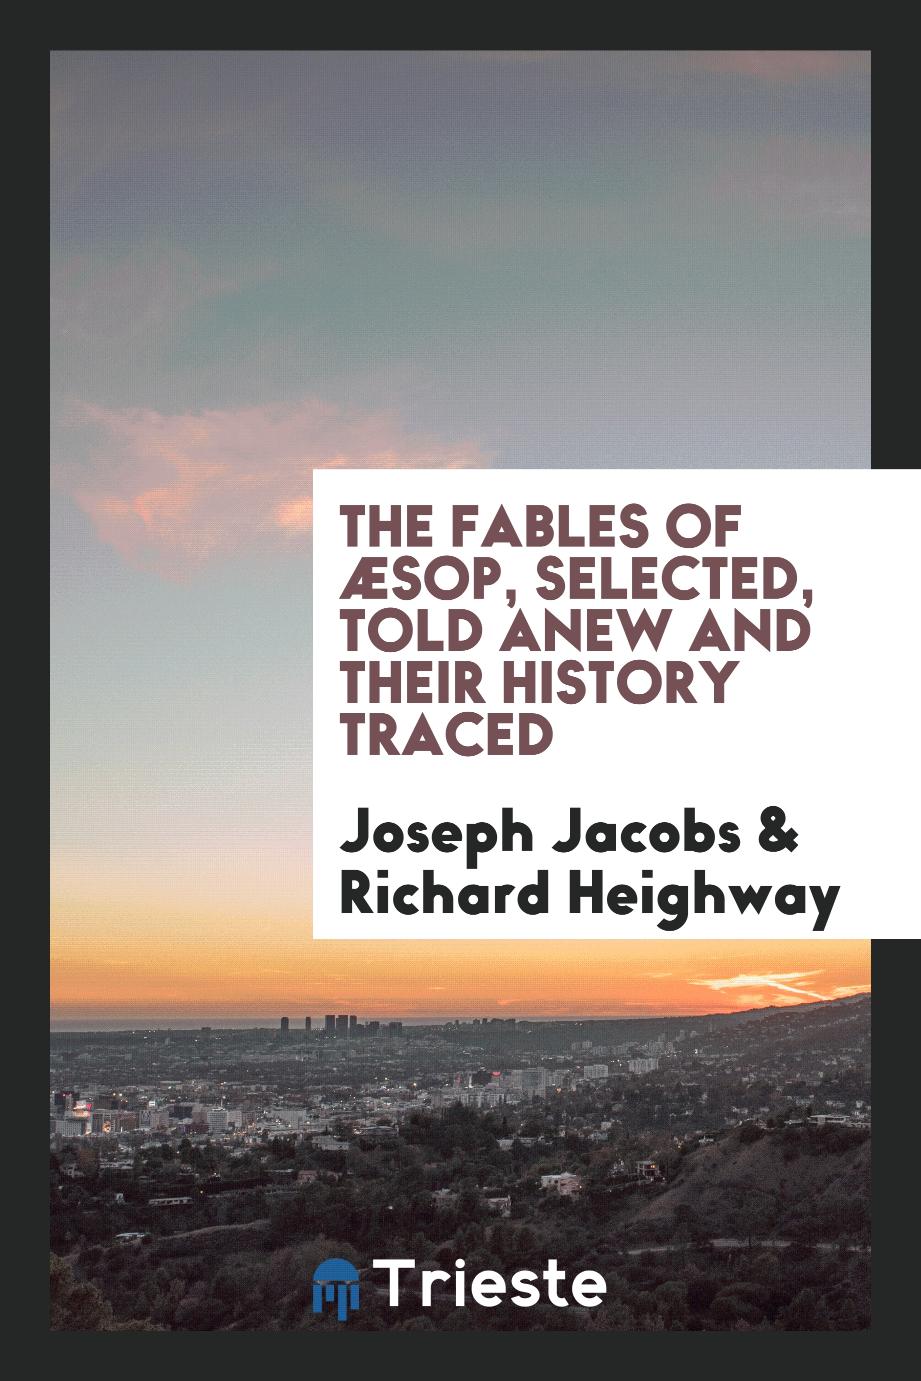 The fables of Æsop, selected, told anew and their history traced